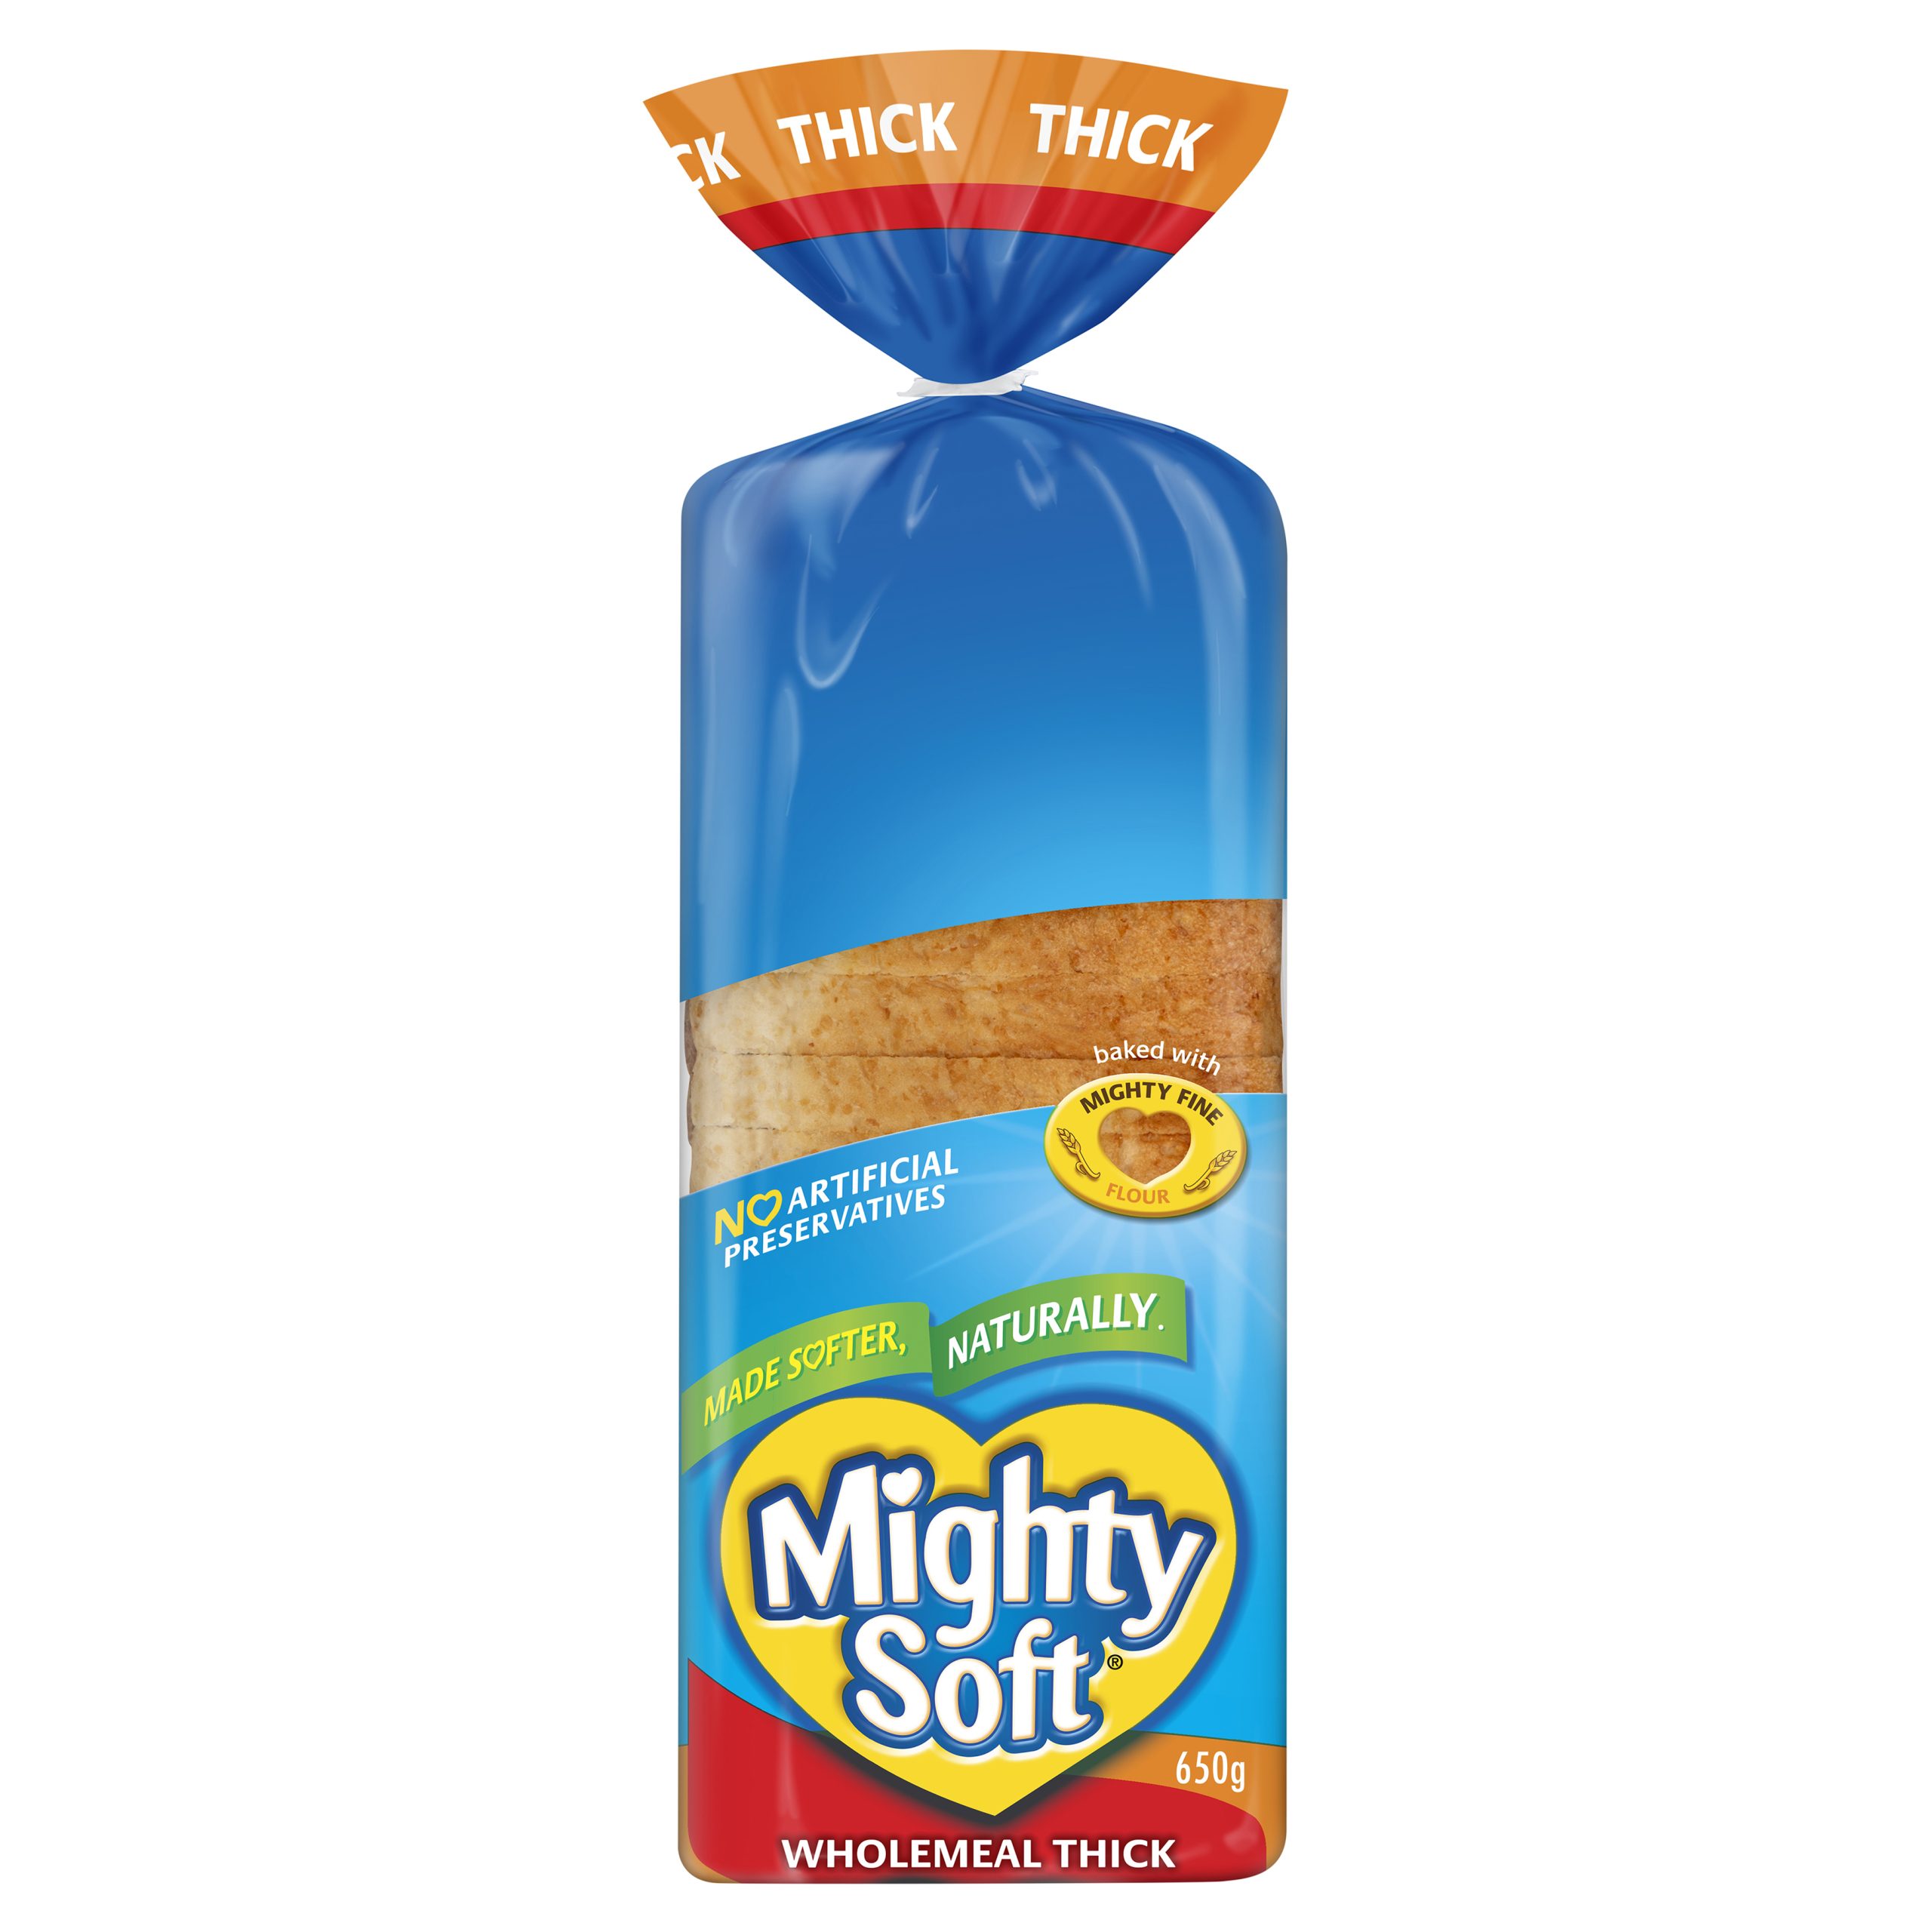 Mighty Soft Loaf Wholemeal Thick 650 g product photo